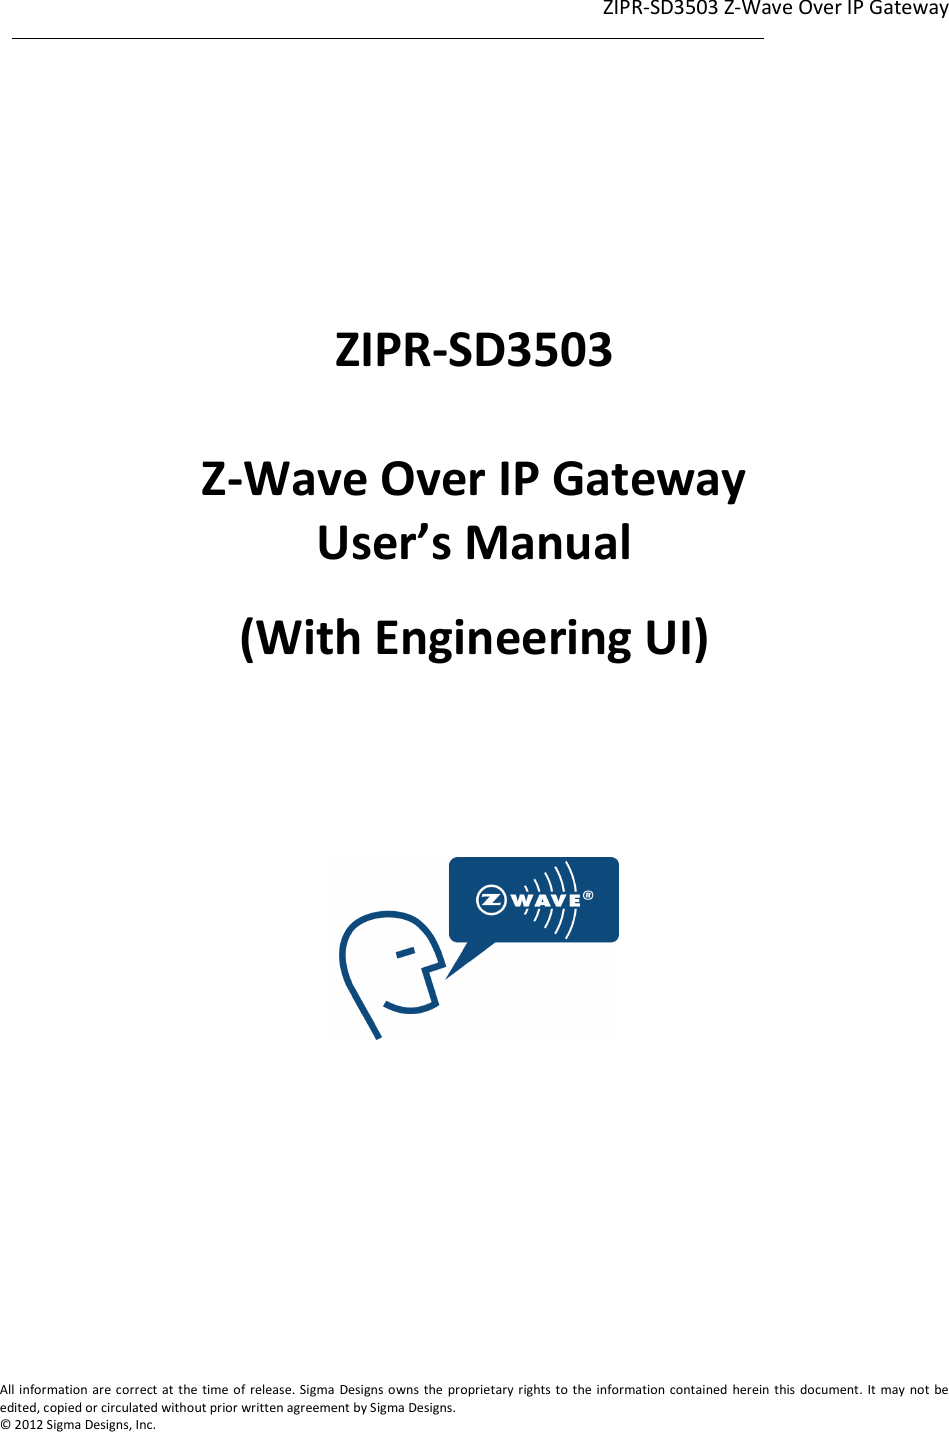 ZIPR-SD3503 Z-Wave Over IP Gateway  1                                                                                                                                                                                                             1             All information are correct at the time of release. Sigma  Designs owns  the proprietary rights to the information contained herein this document. It  may not  be edited, copied or circulated without prior written agreement by Sigma Designs.   © 2012 Sigma Designs, Inc.       ZIPR-SD3503  Z-Wave Over IP Gateway User’s Manual (With Engineering UI)        